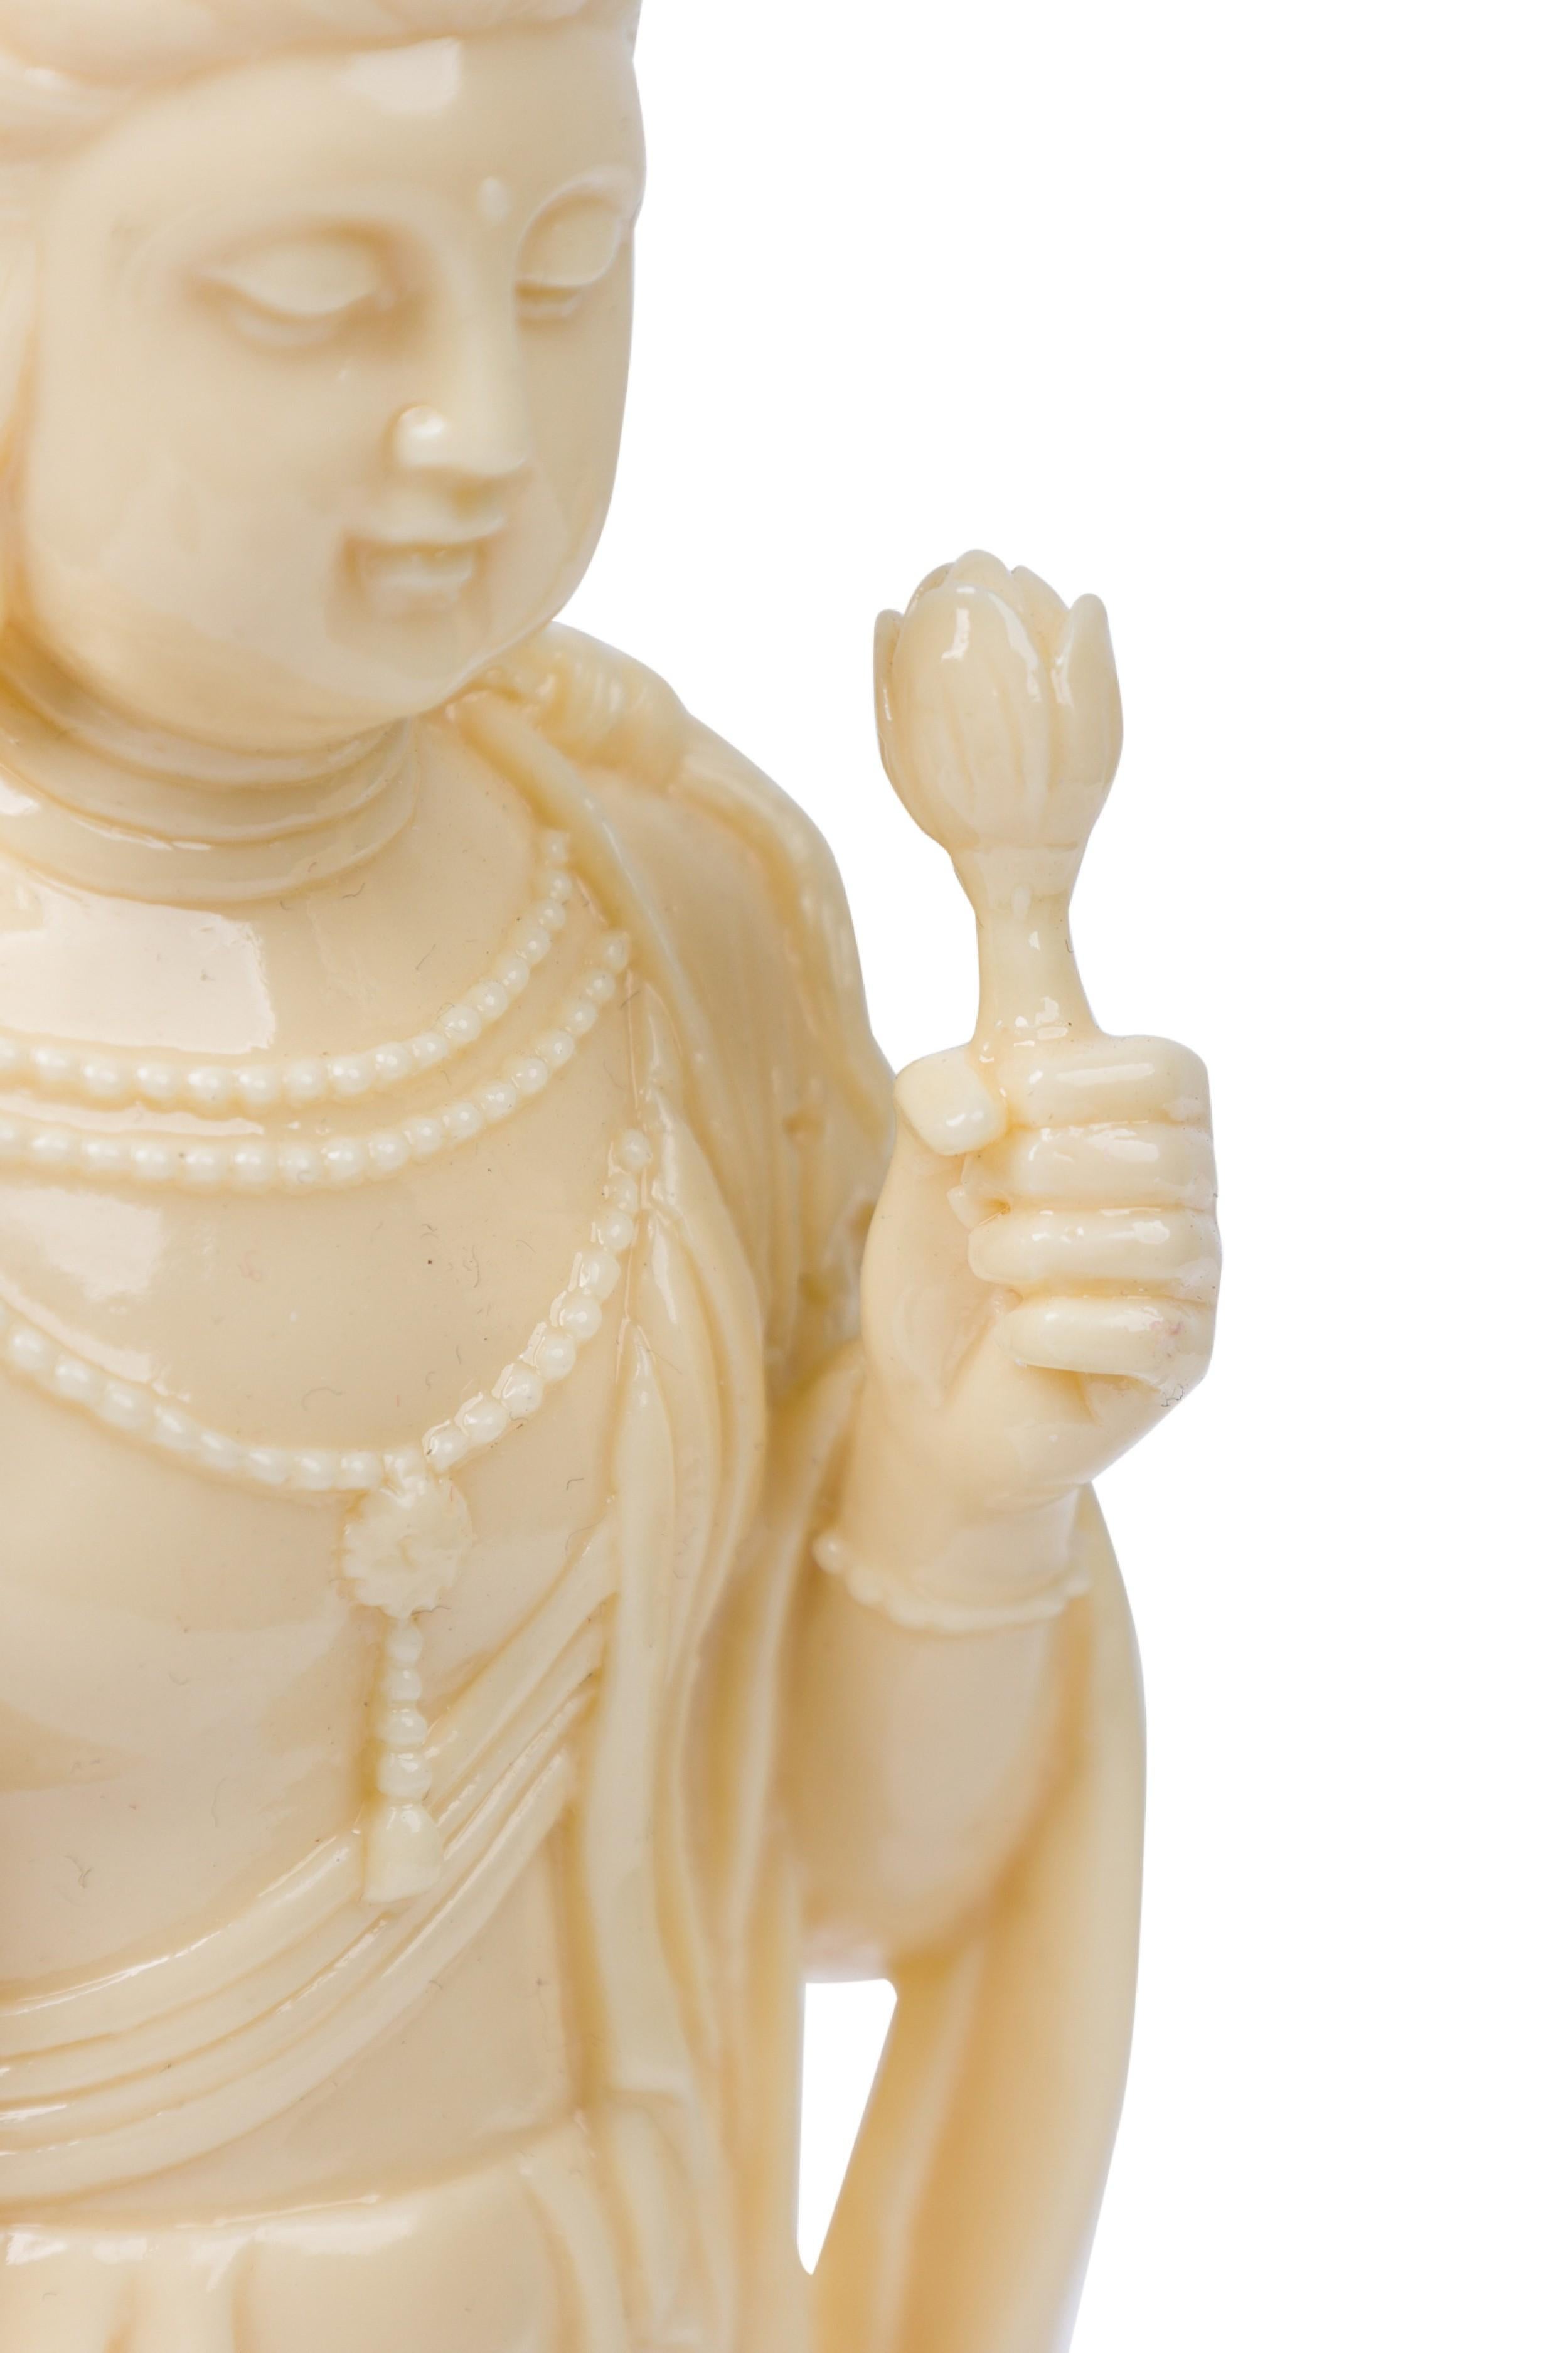 PAIR of Similar Chinese beige plastic robed, beaded figurine depicting the Buddhist Goddess with left arm raised, grasping a lotus, right arm relaxed with open palm. (PRICED AS PAIR)
 

 Broken left hand on one figure
